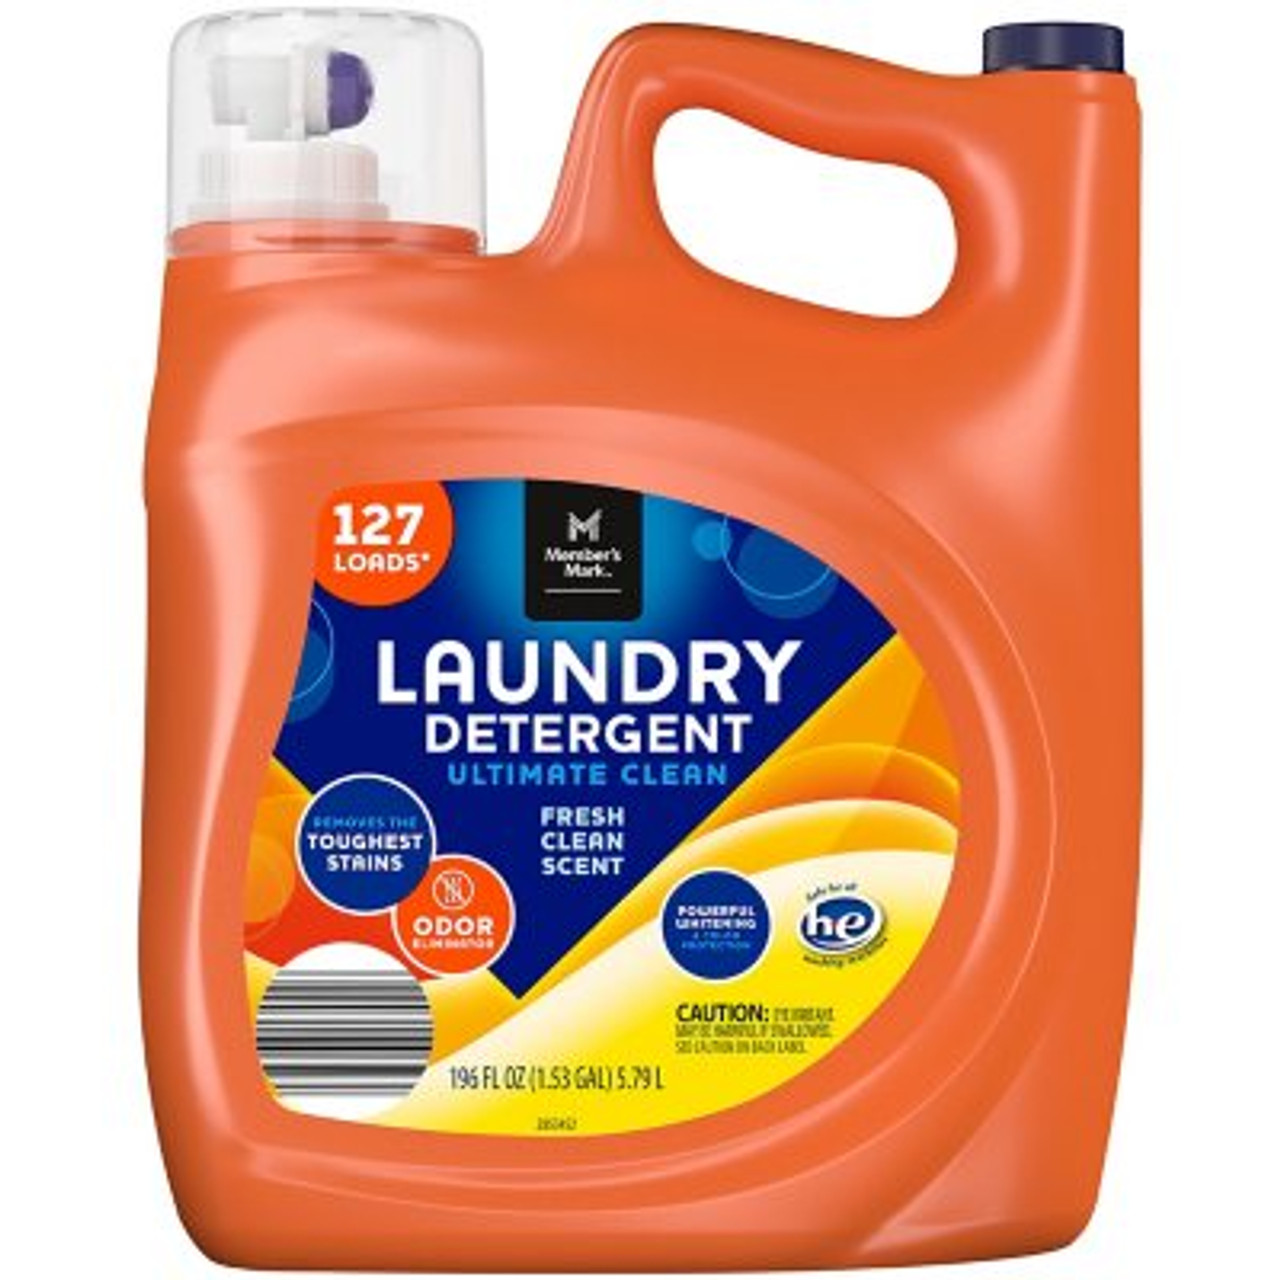 Member's Mark Liquid Laundry Detergent, Ultimate Clean Fresh Scent (196 fl. oz., 127 loads) - [From 75.00 - Choose pk Qty ] - *Ships from Miami